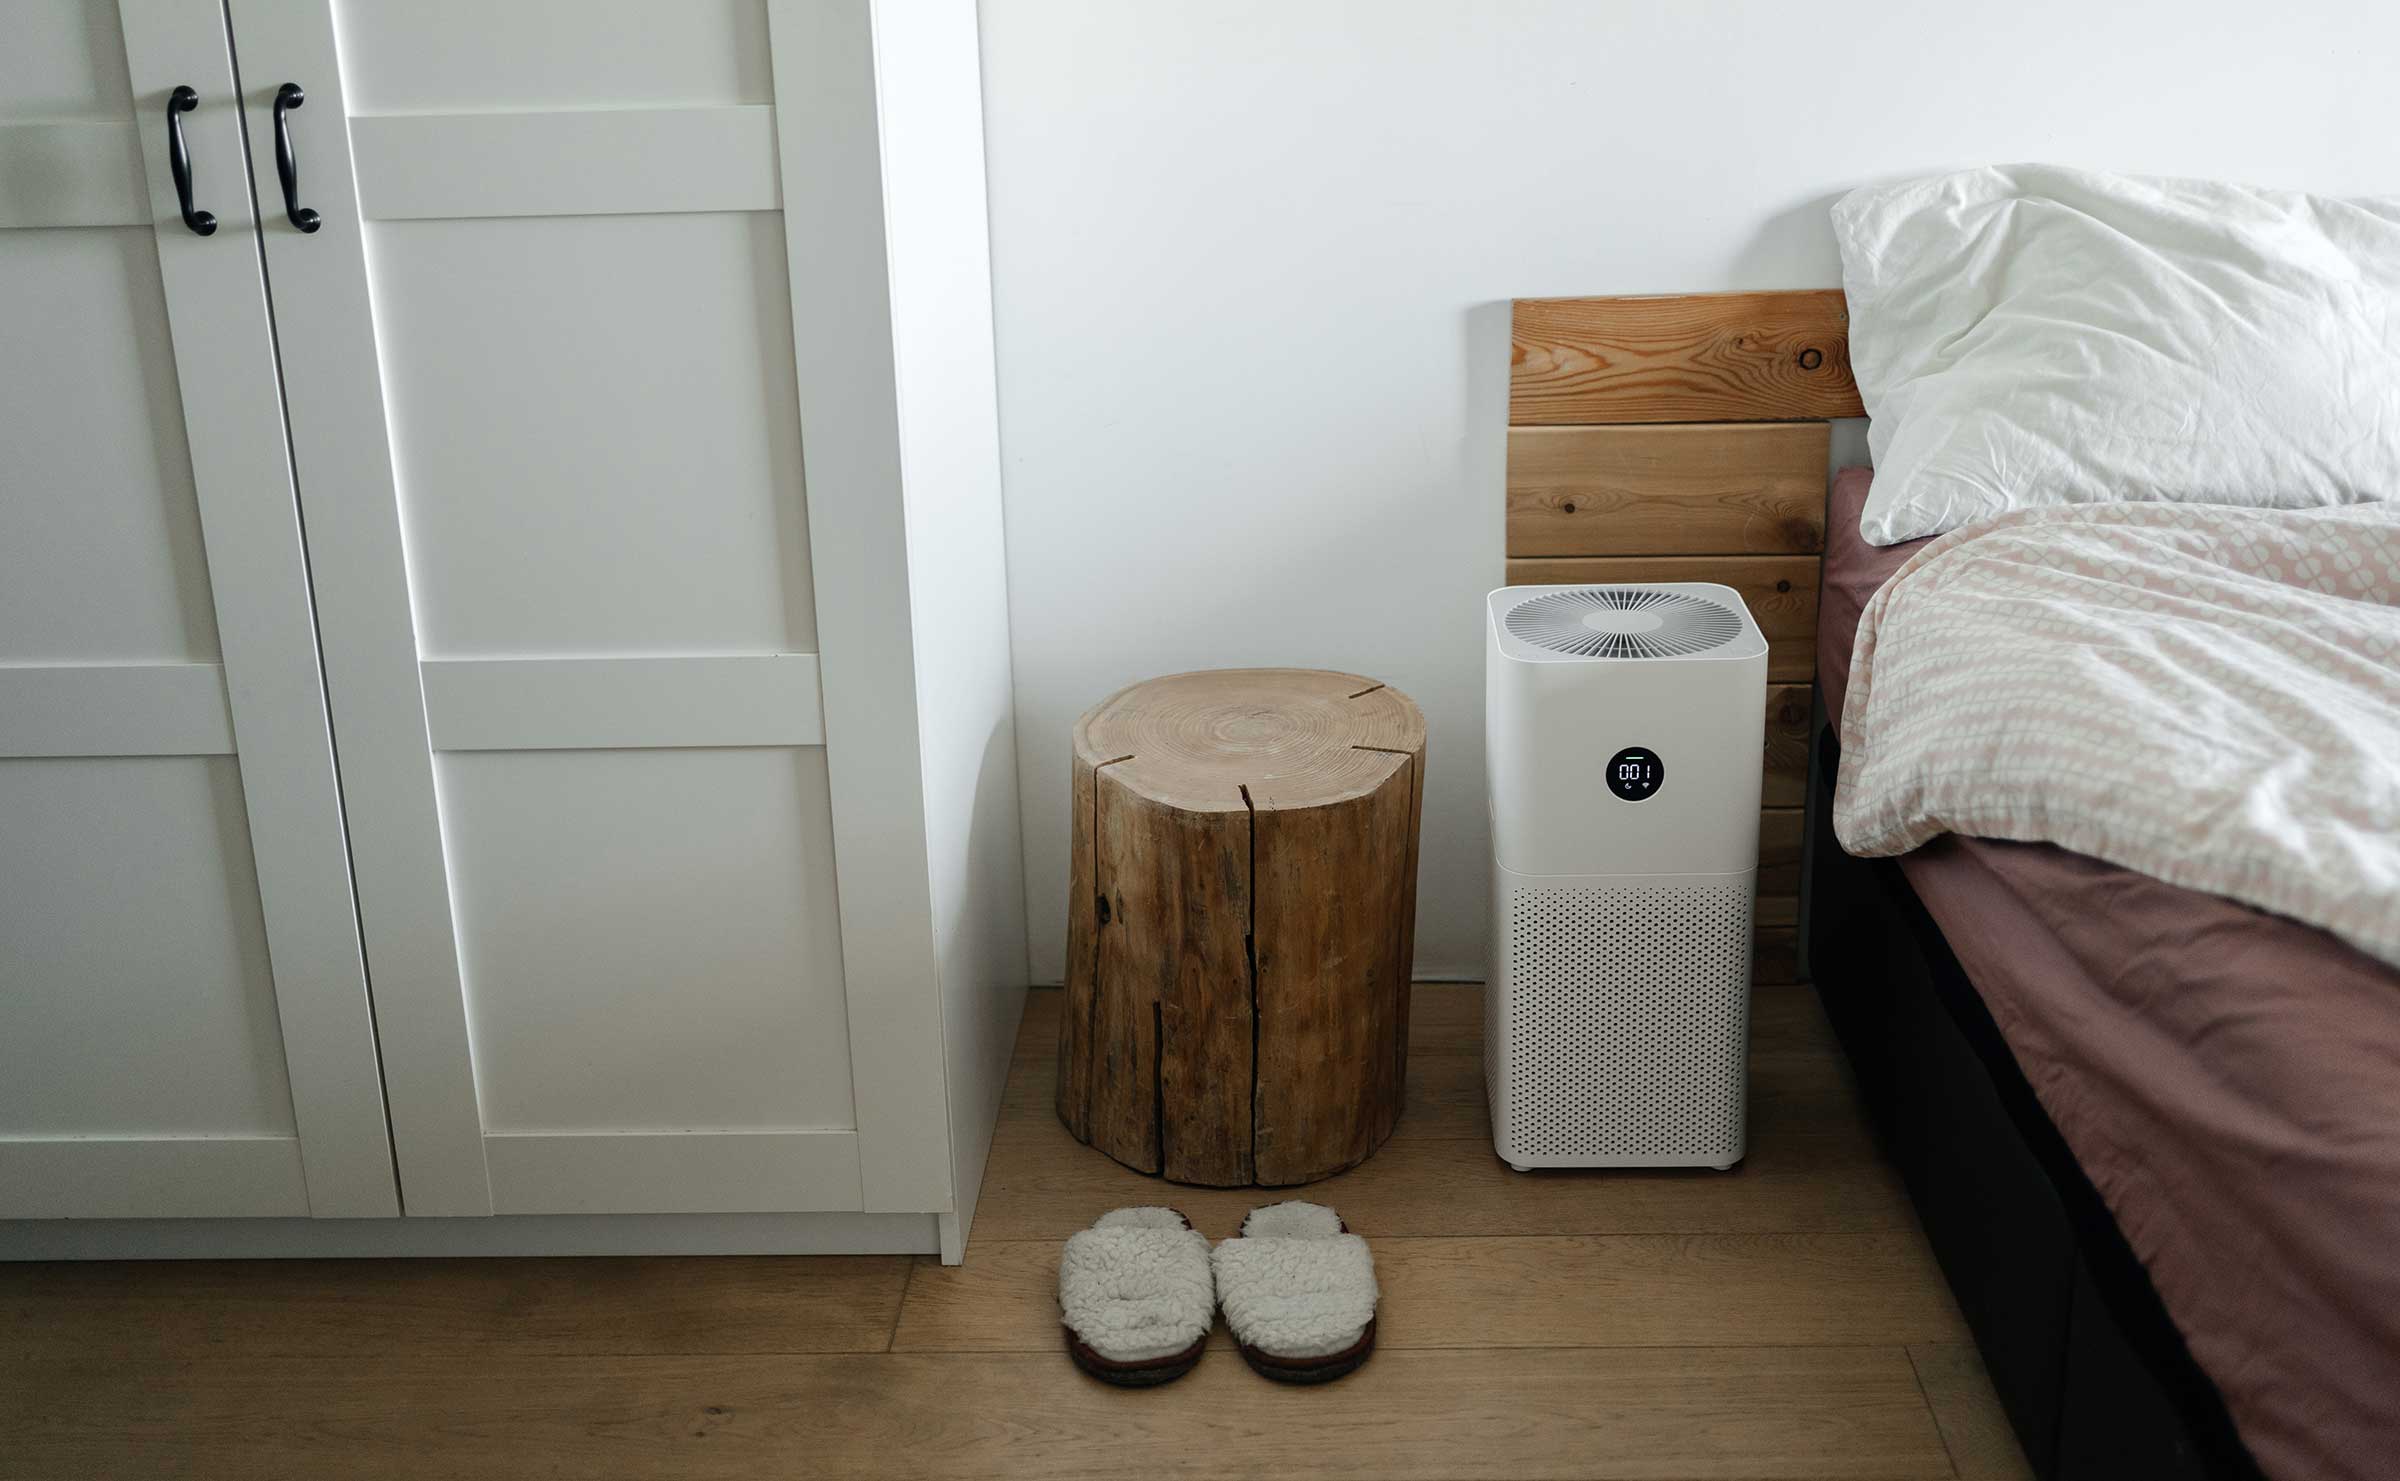 The air purifier stands on the floor in the bedroom next to the bed and cleans the air of dust